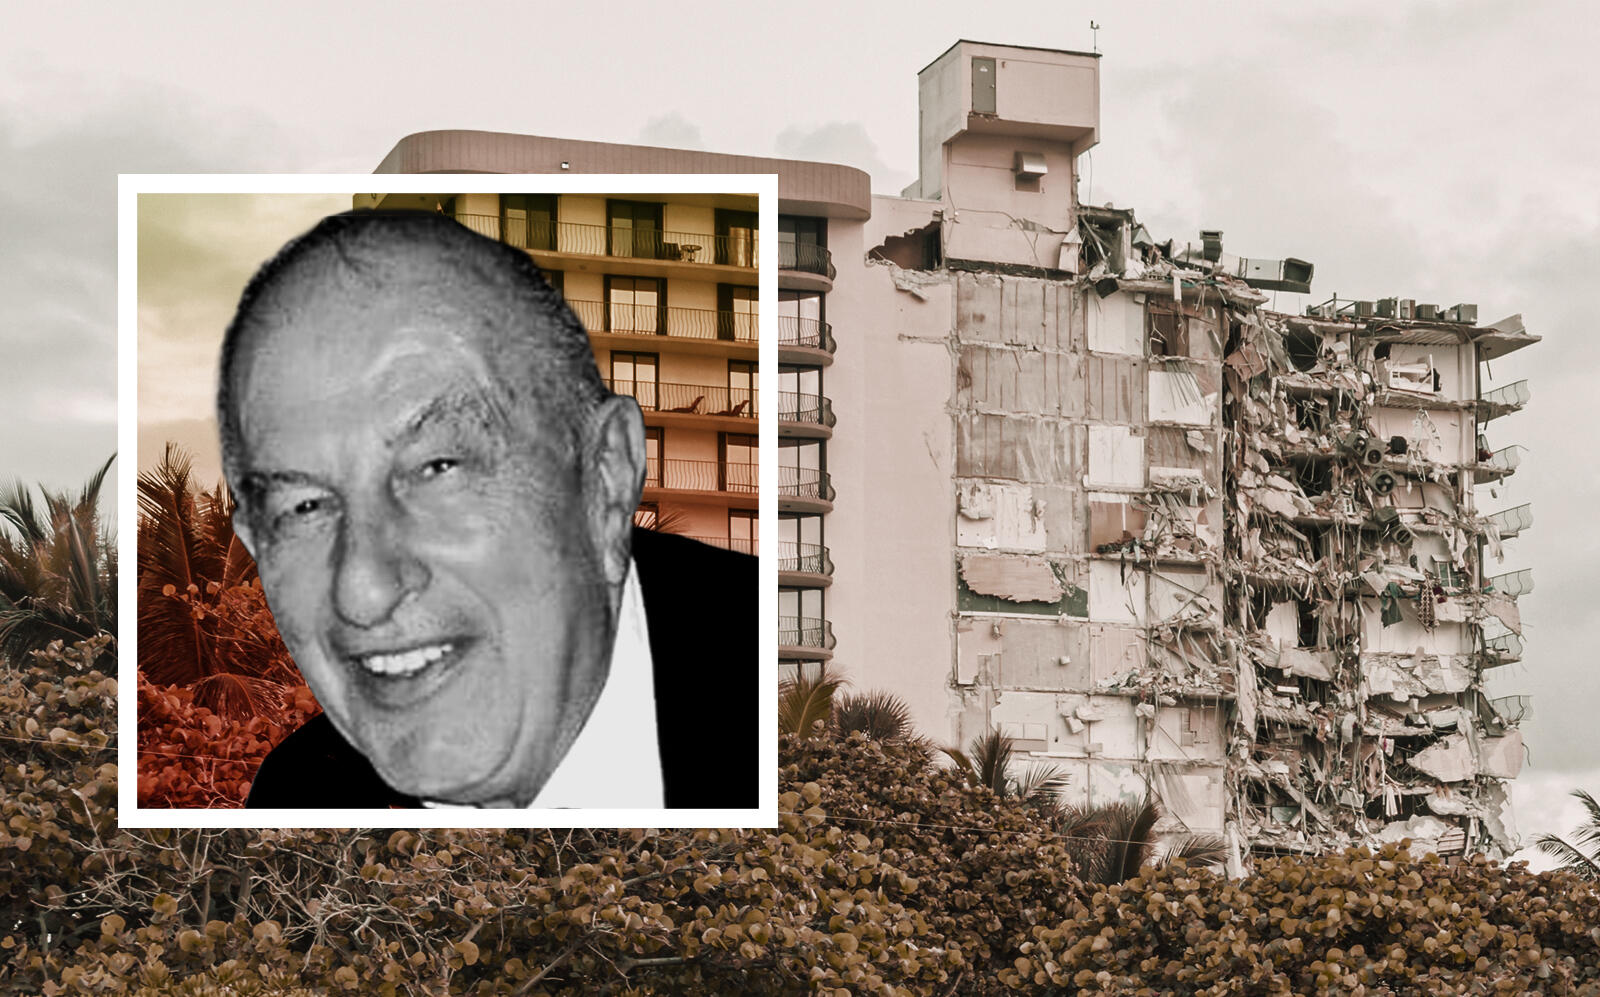 Nathan Reiber was the developer for Champlain Towers South in Surfside (Getty, Levitt-Weinstein Obituary)